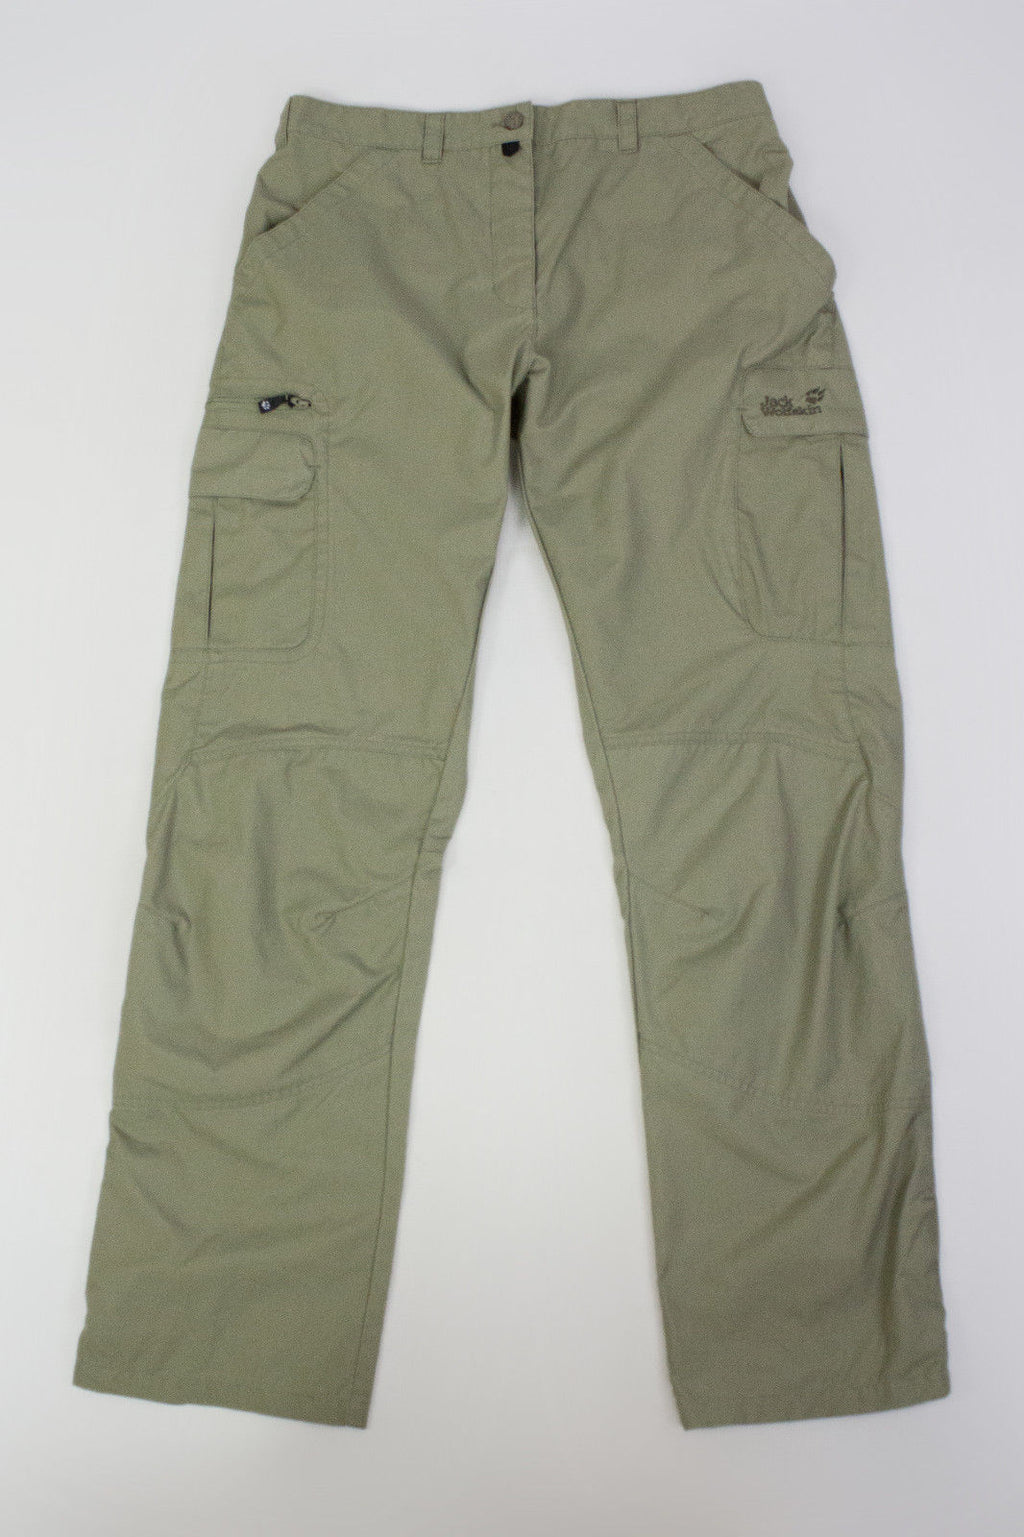 Jack Wolfskin Nano Tex Hiking/Outdoor Pants, XL - secondfirst